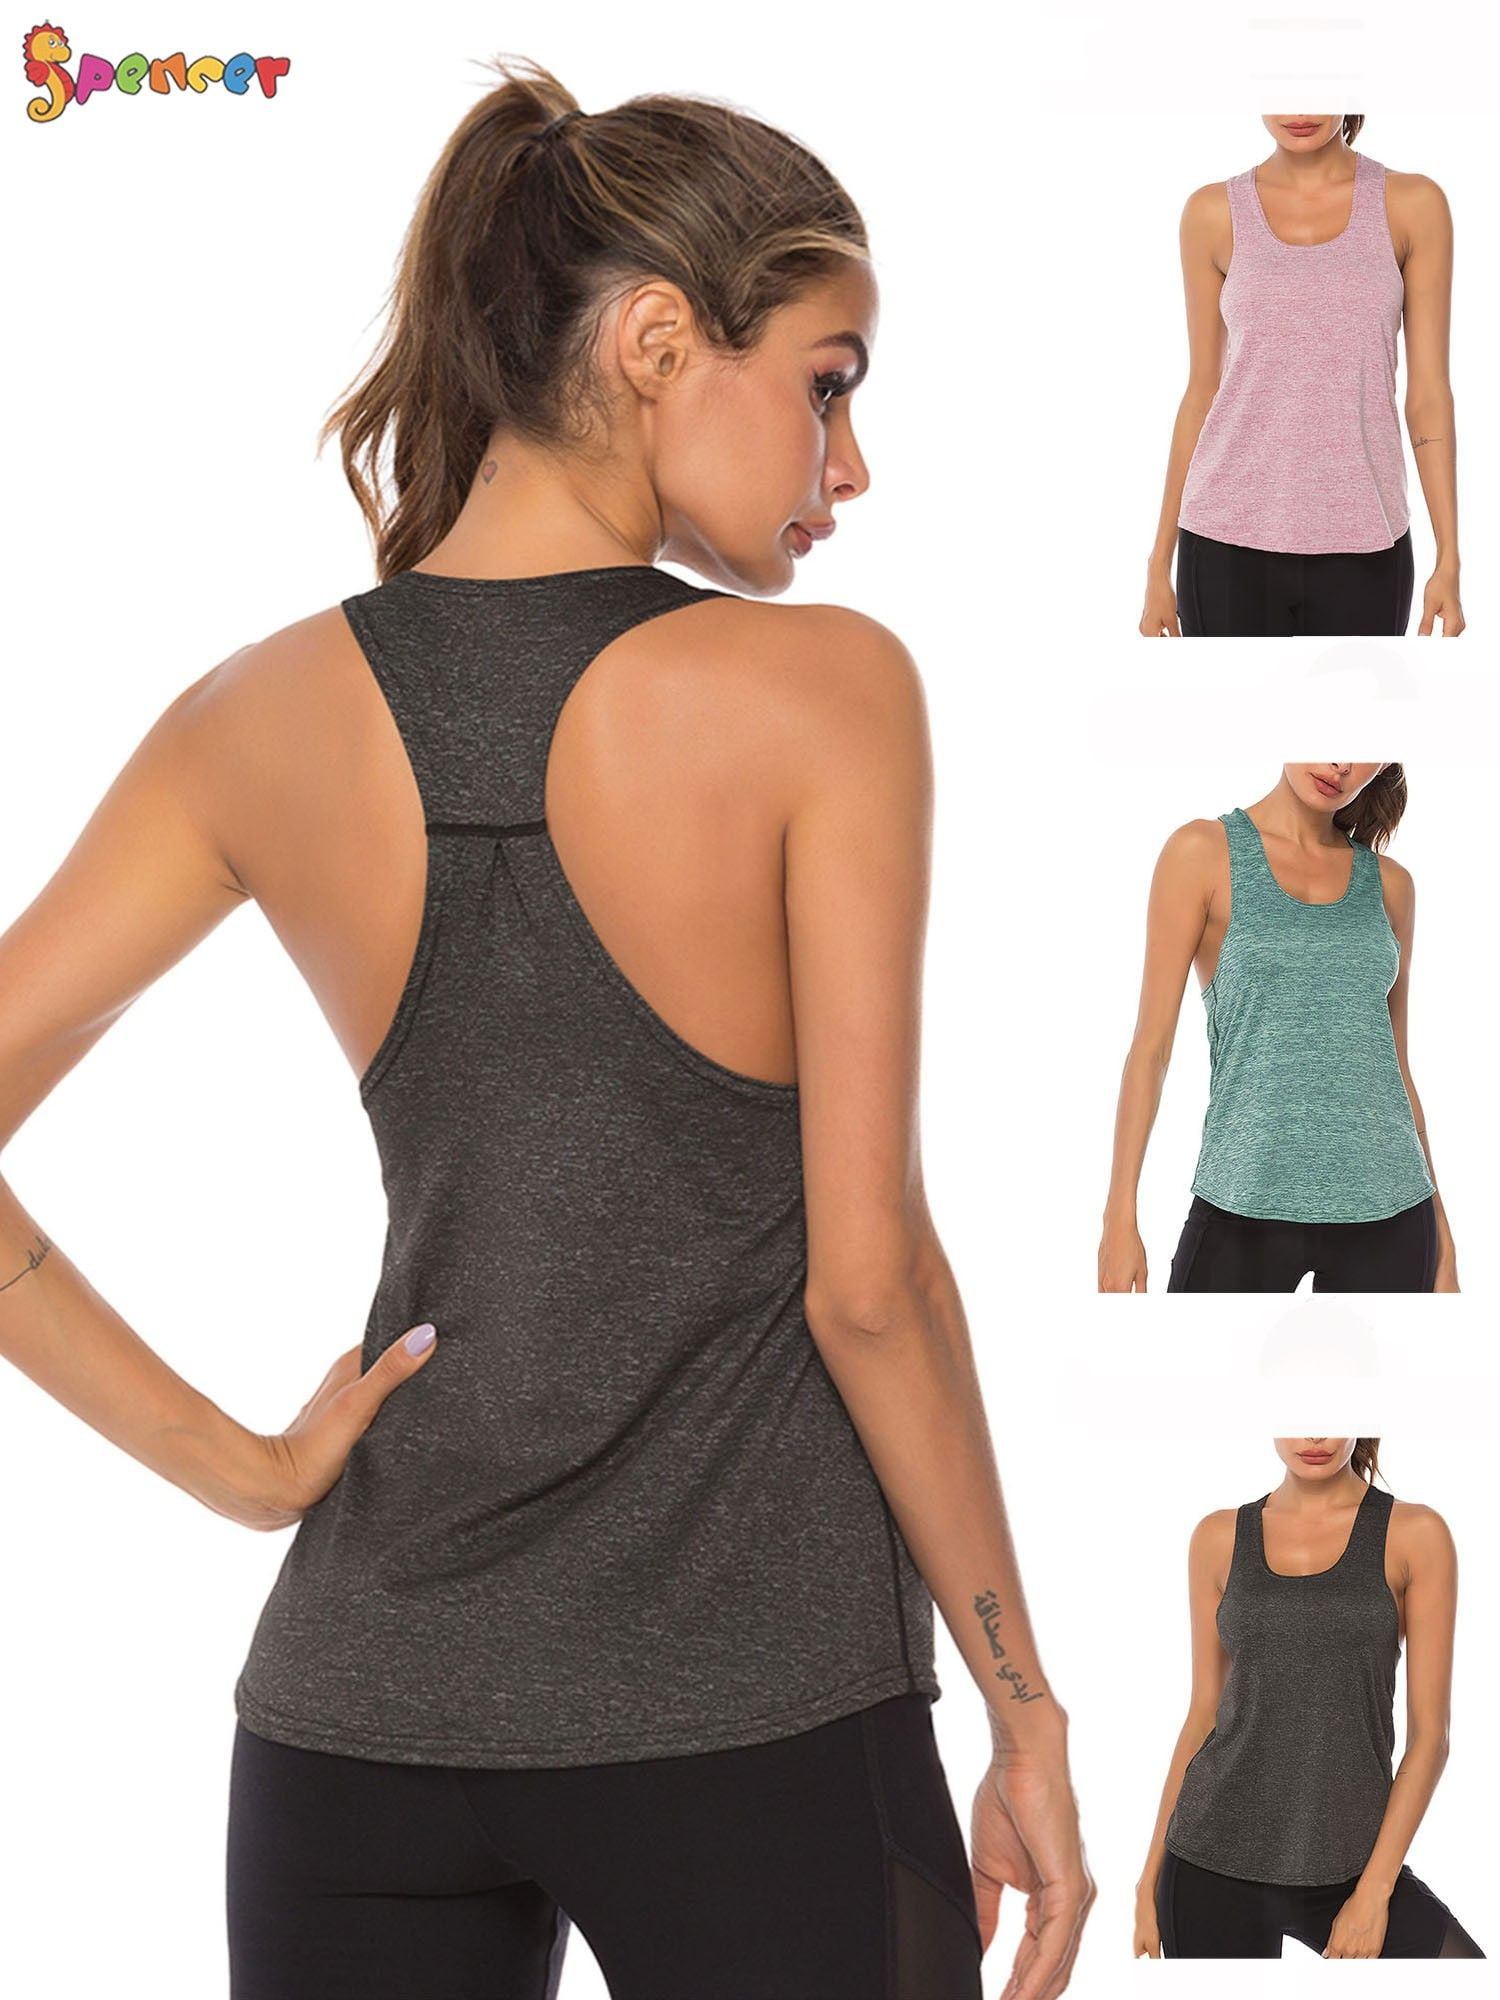 Spencer Women's Workout Tank Tops Casual Sleeveless Racerback Athletic Yoga  Tops Quick Dry Sport Shirts for Gym Exercise (L, Grey) 